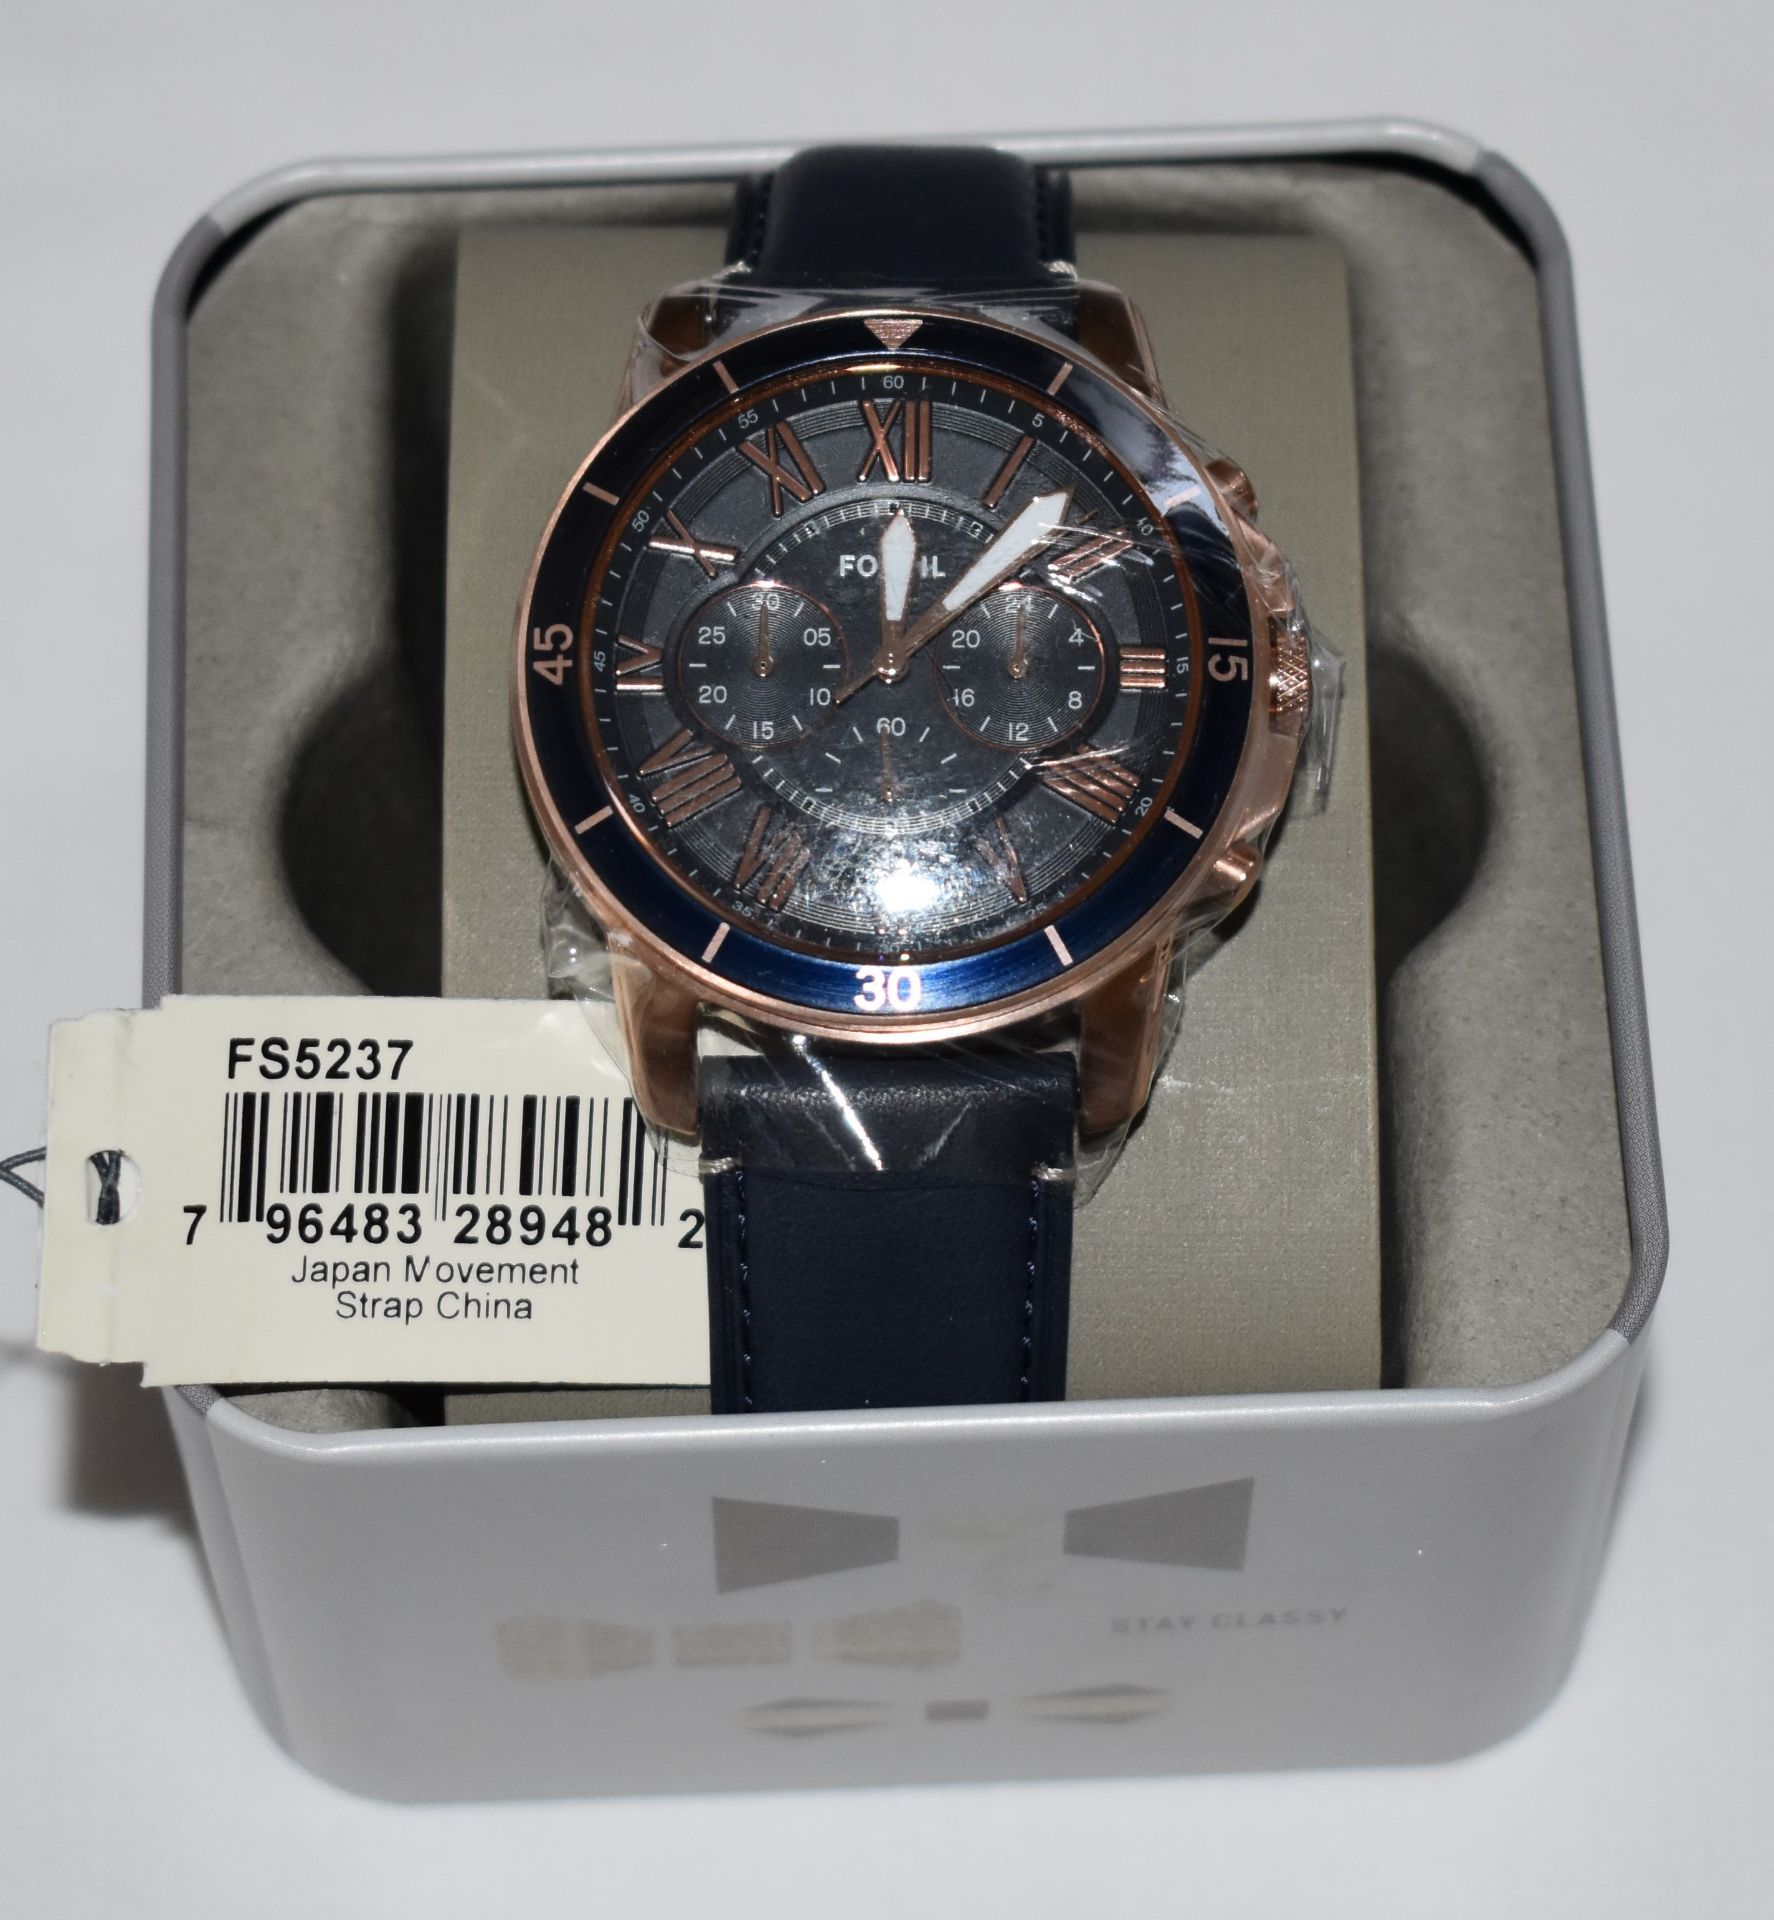 Fossil Men's Watch FS 5237 - Image 2 of 2